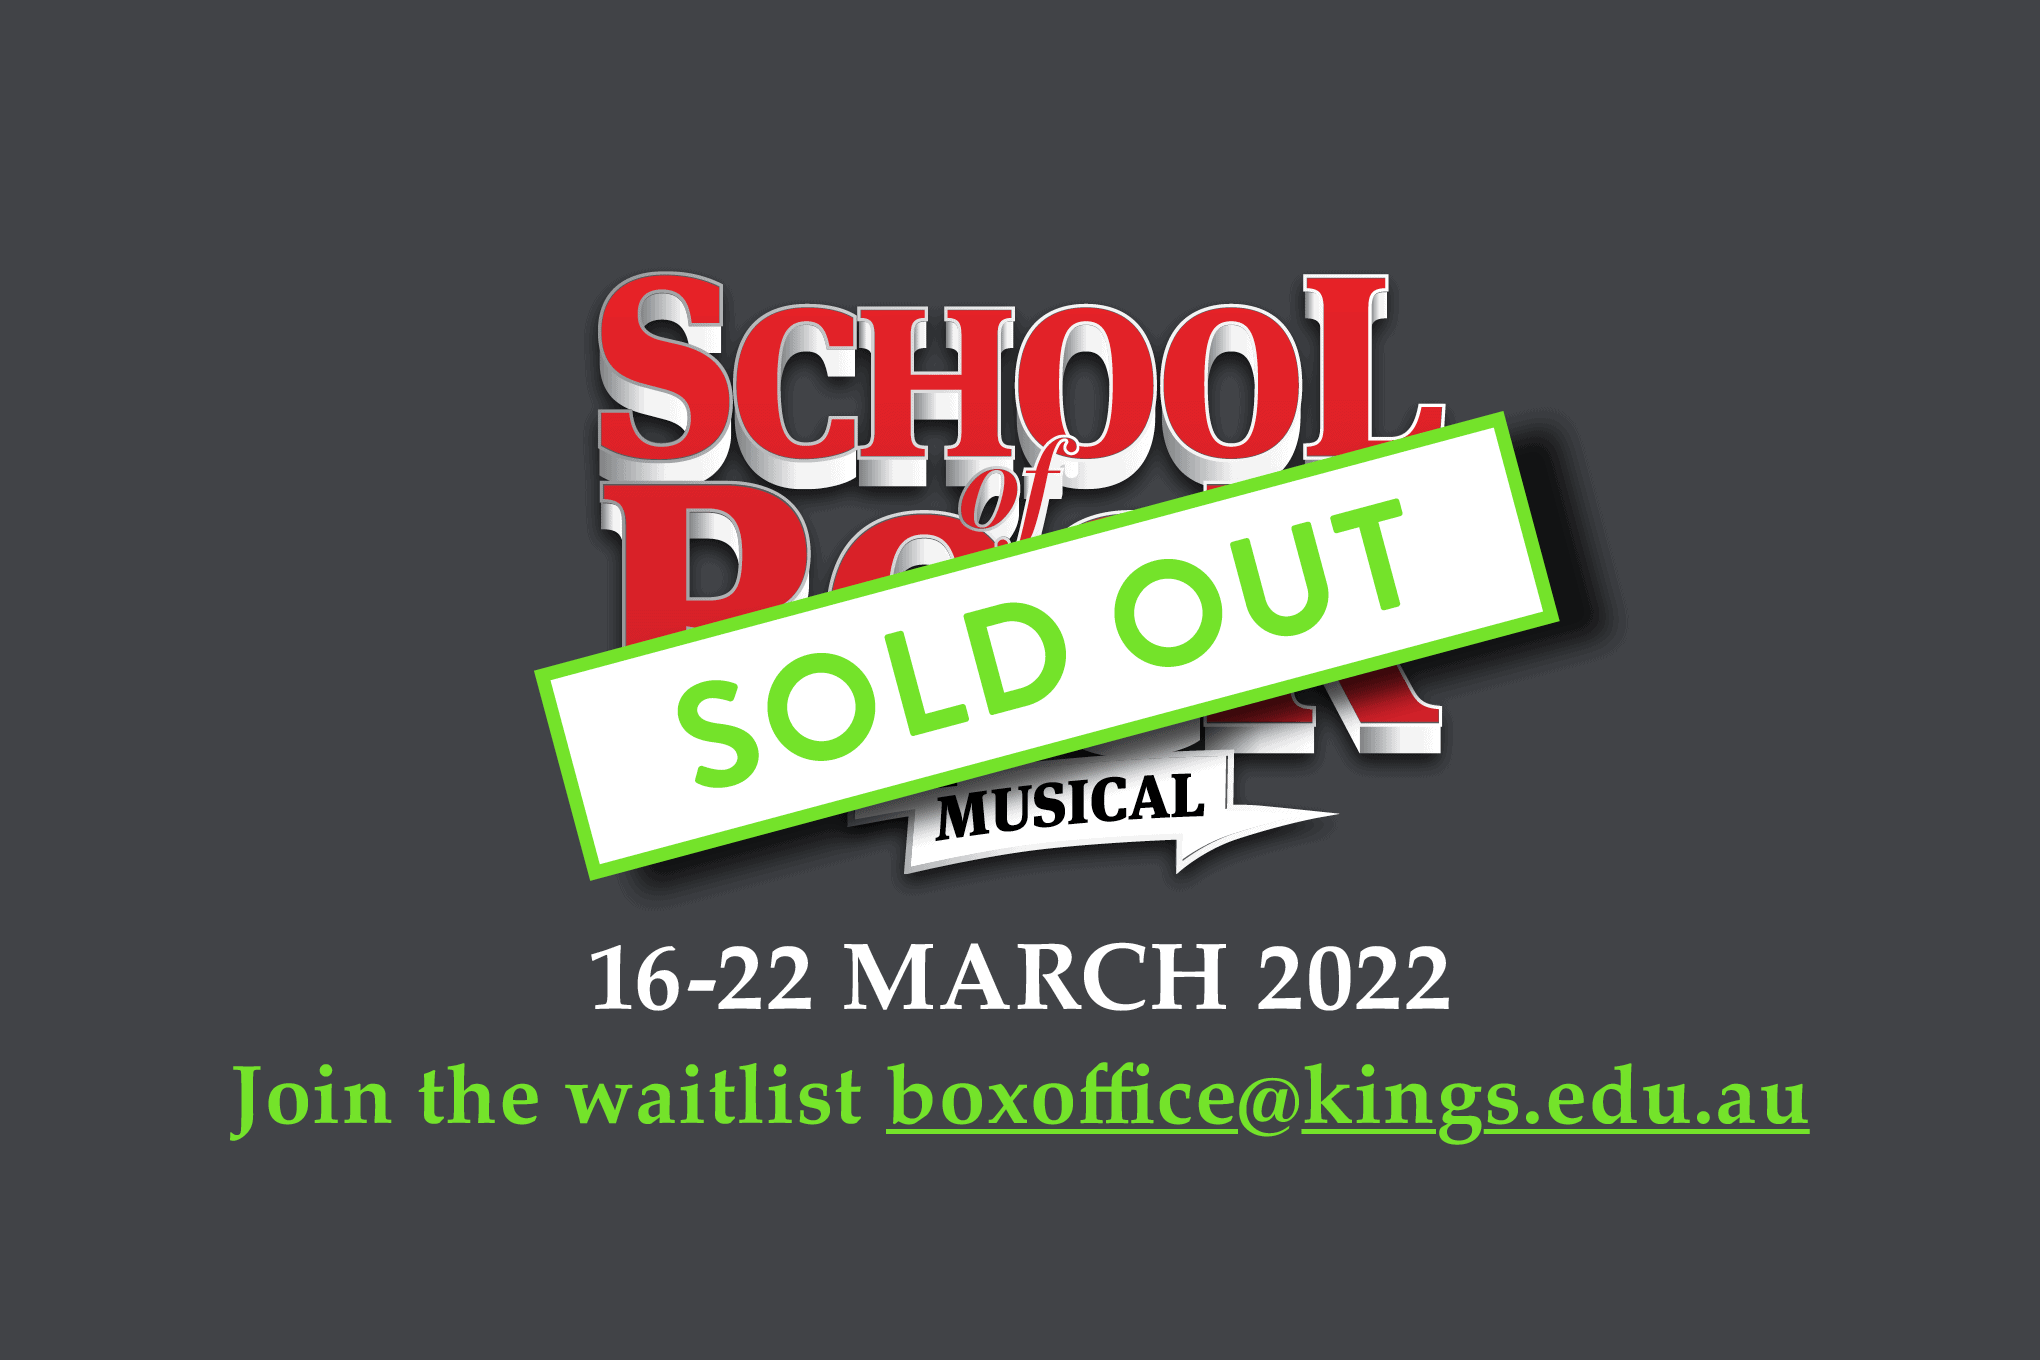 School_of_Rock_Sold Out